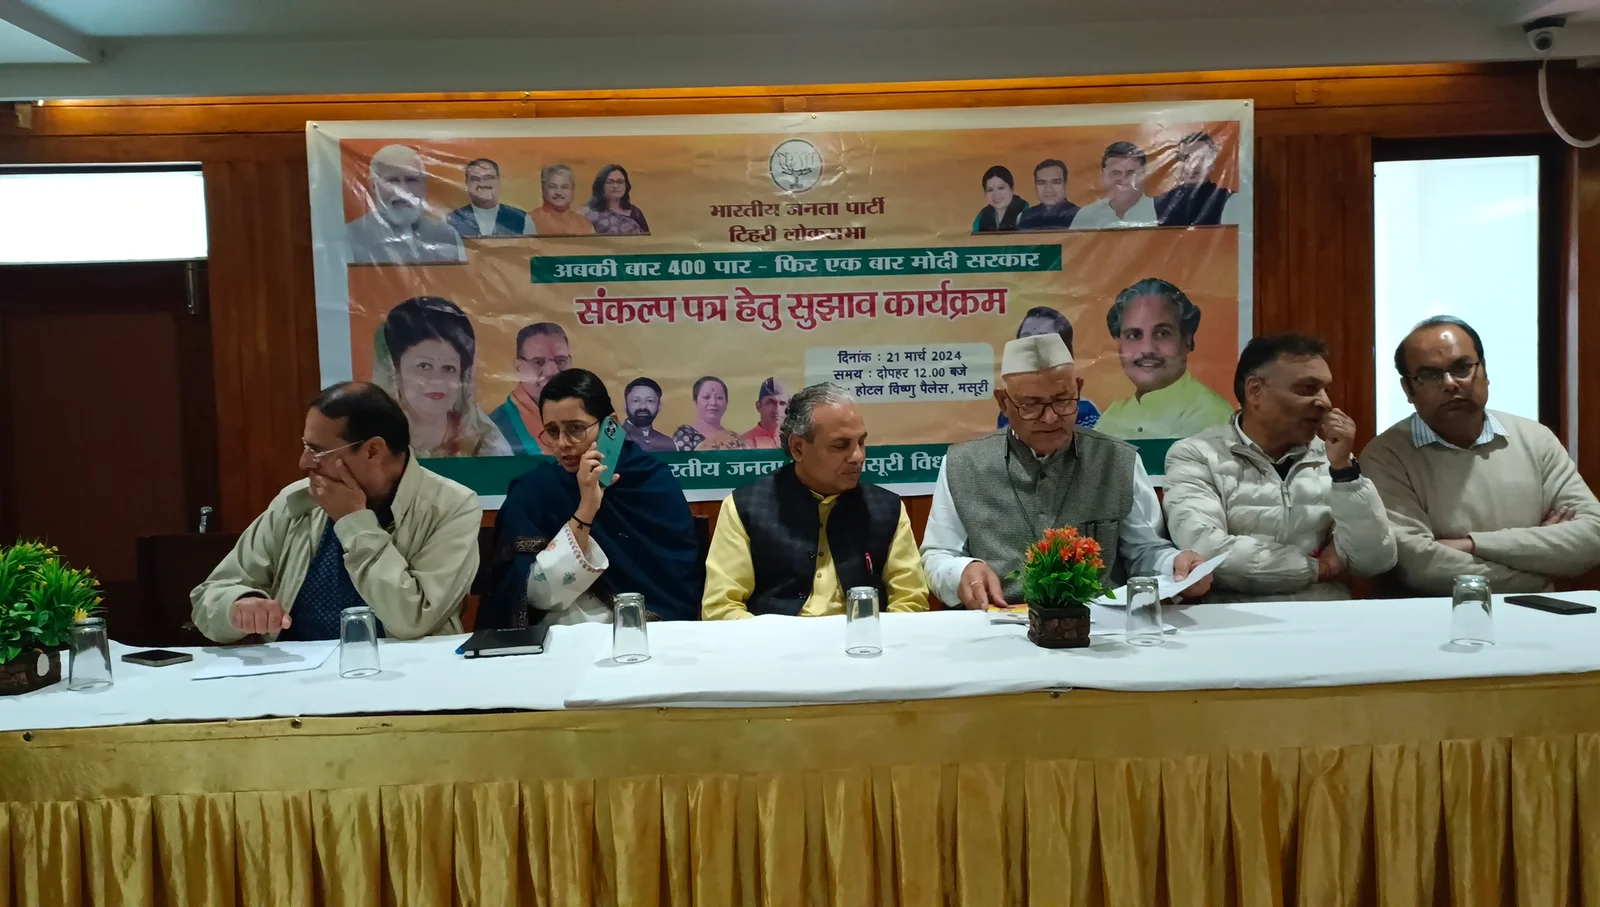 BJP leaders in Mussoorie took suggestions from various business people for "Sankalp Patra" suggestions for Lok Sabha elections.